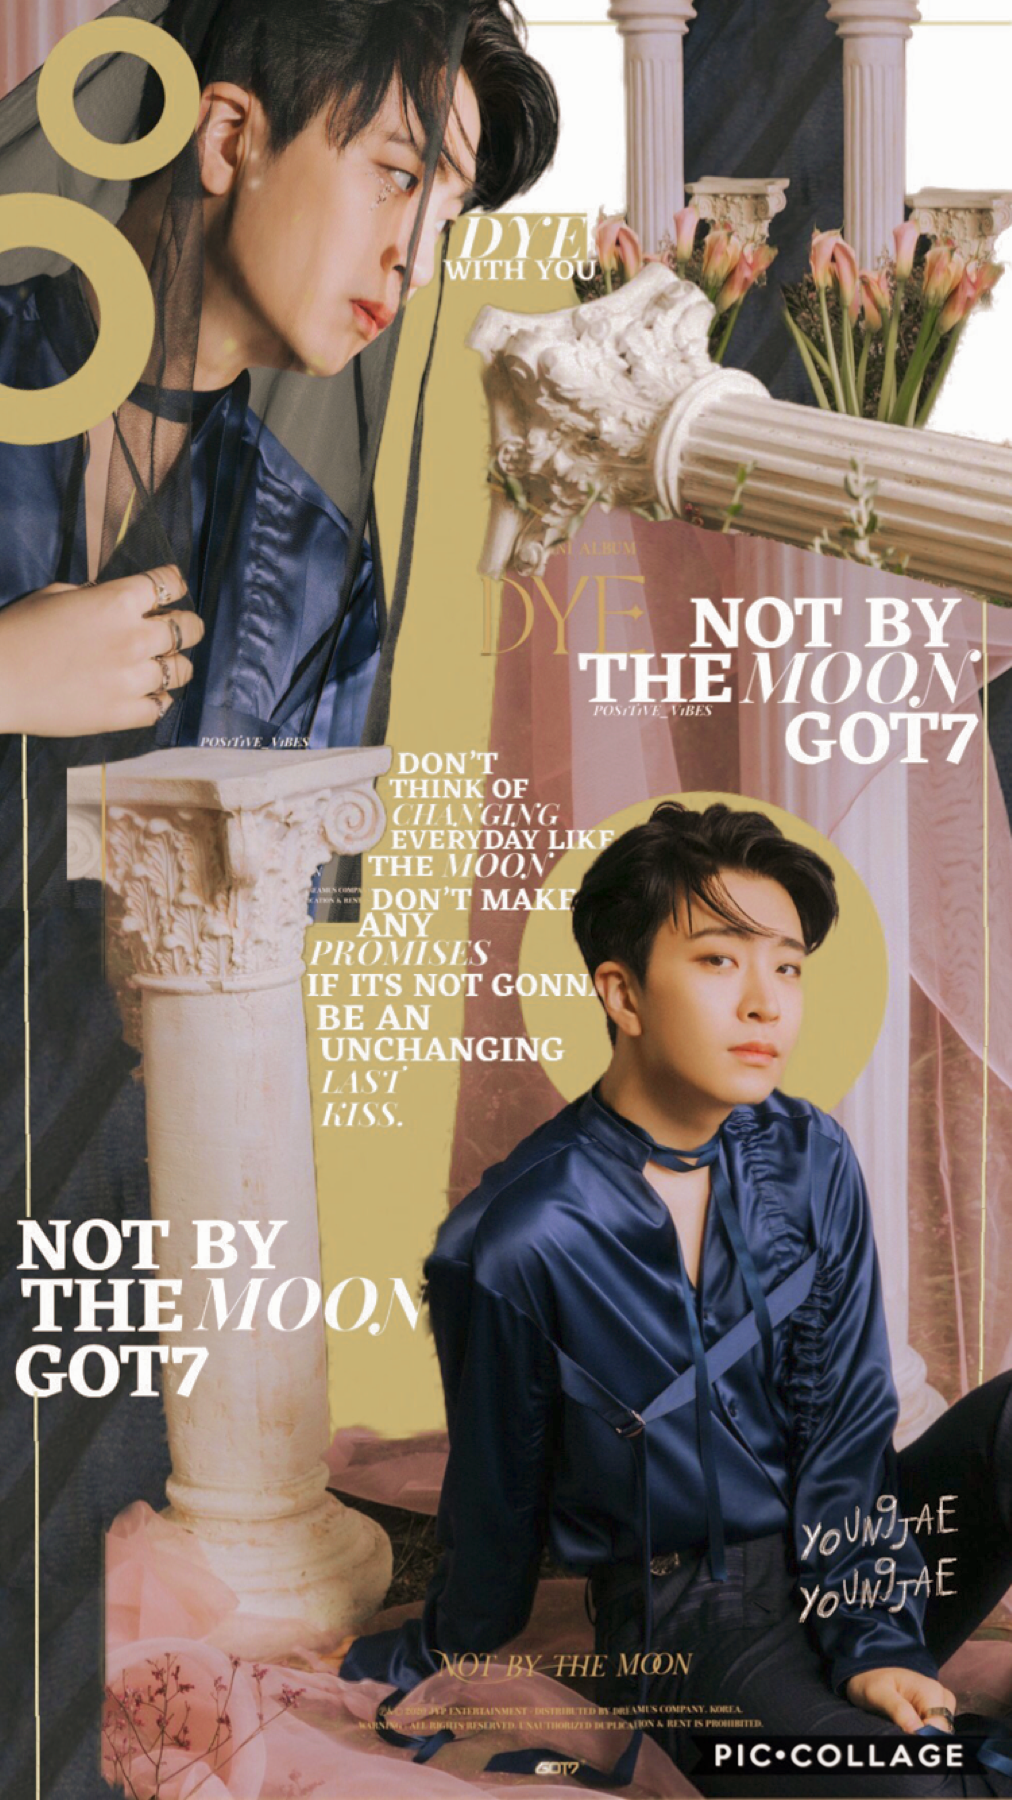 🌙”NOT BY THE MOON” - GOT7🌙 truly, the whole comeback serves, not disappointed :)🌙woke up pretty early today, made some coffee & was actually productive🌙what are you guys up to?🌙
#PCONLY 